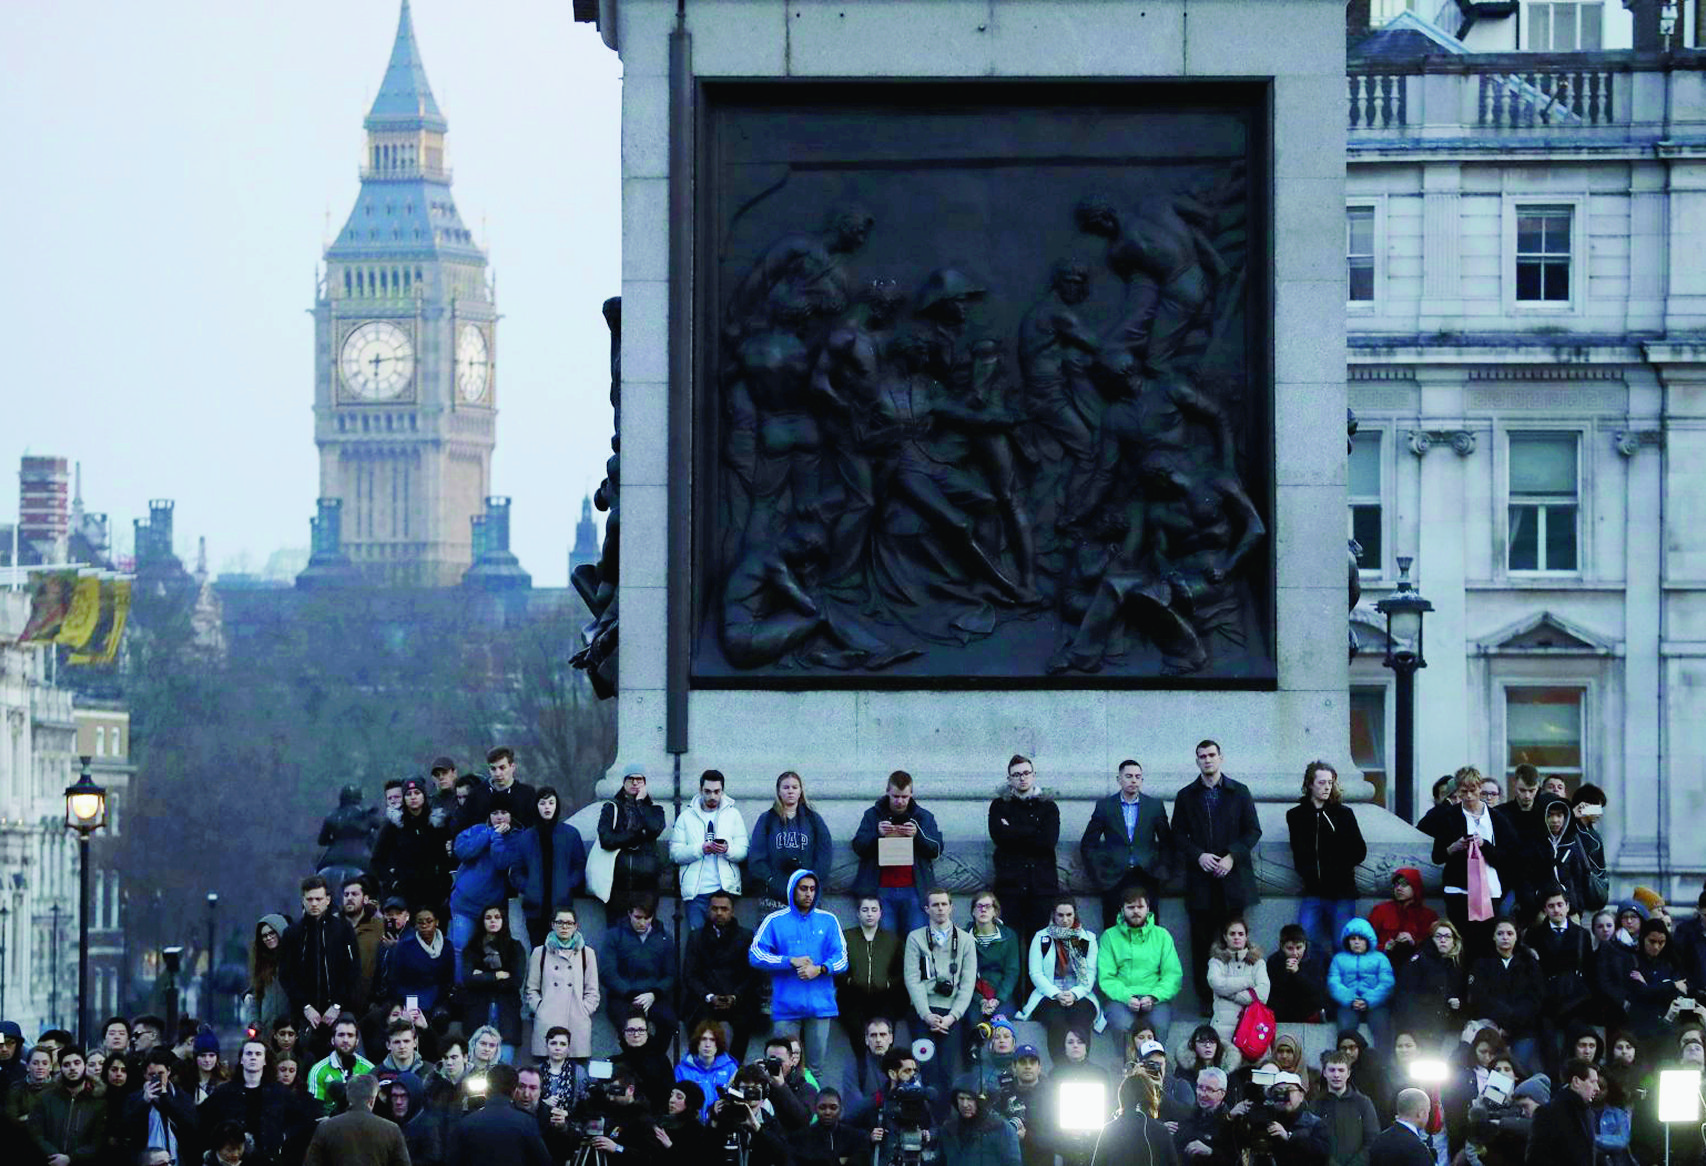 People observe a minutes silence at a vigil for the victims of Wednesday's attack, at Trafalgar Square in London, Thursday, March 23, 2017. The Islamic State group has claimed responsibility for an attack by a man who plowed an SUV into pedestrians and then stabbed a police officer to death on the grounds of Britain's Parliament. Mayor Sadiq Khan called for Londoners to attend a candlelit vigil at Trafalgar Square on Thursday evening in solidarity with the victims and their families and to show that London remains united. (AP Photo/Matt Dunham) Britain Attack